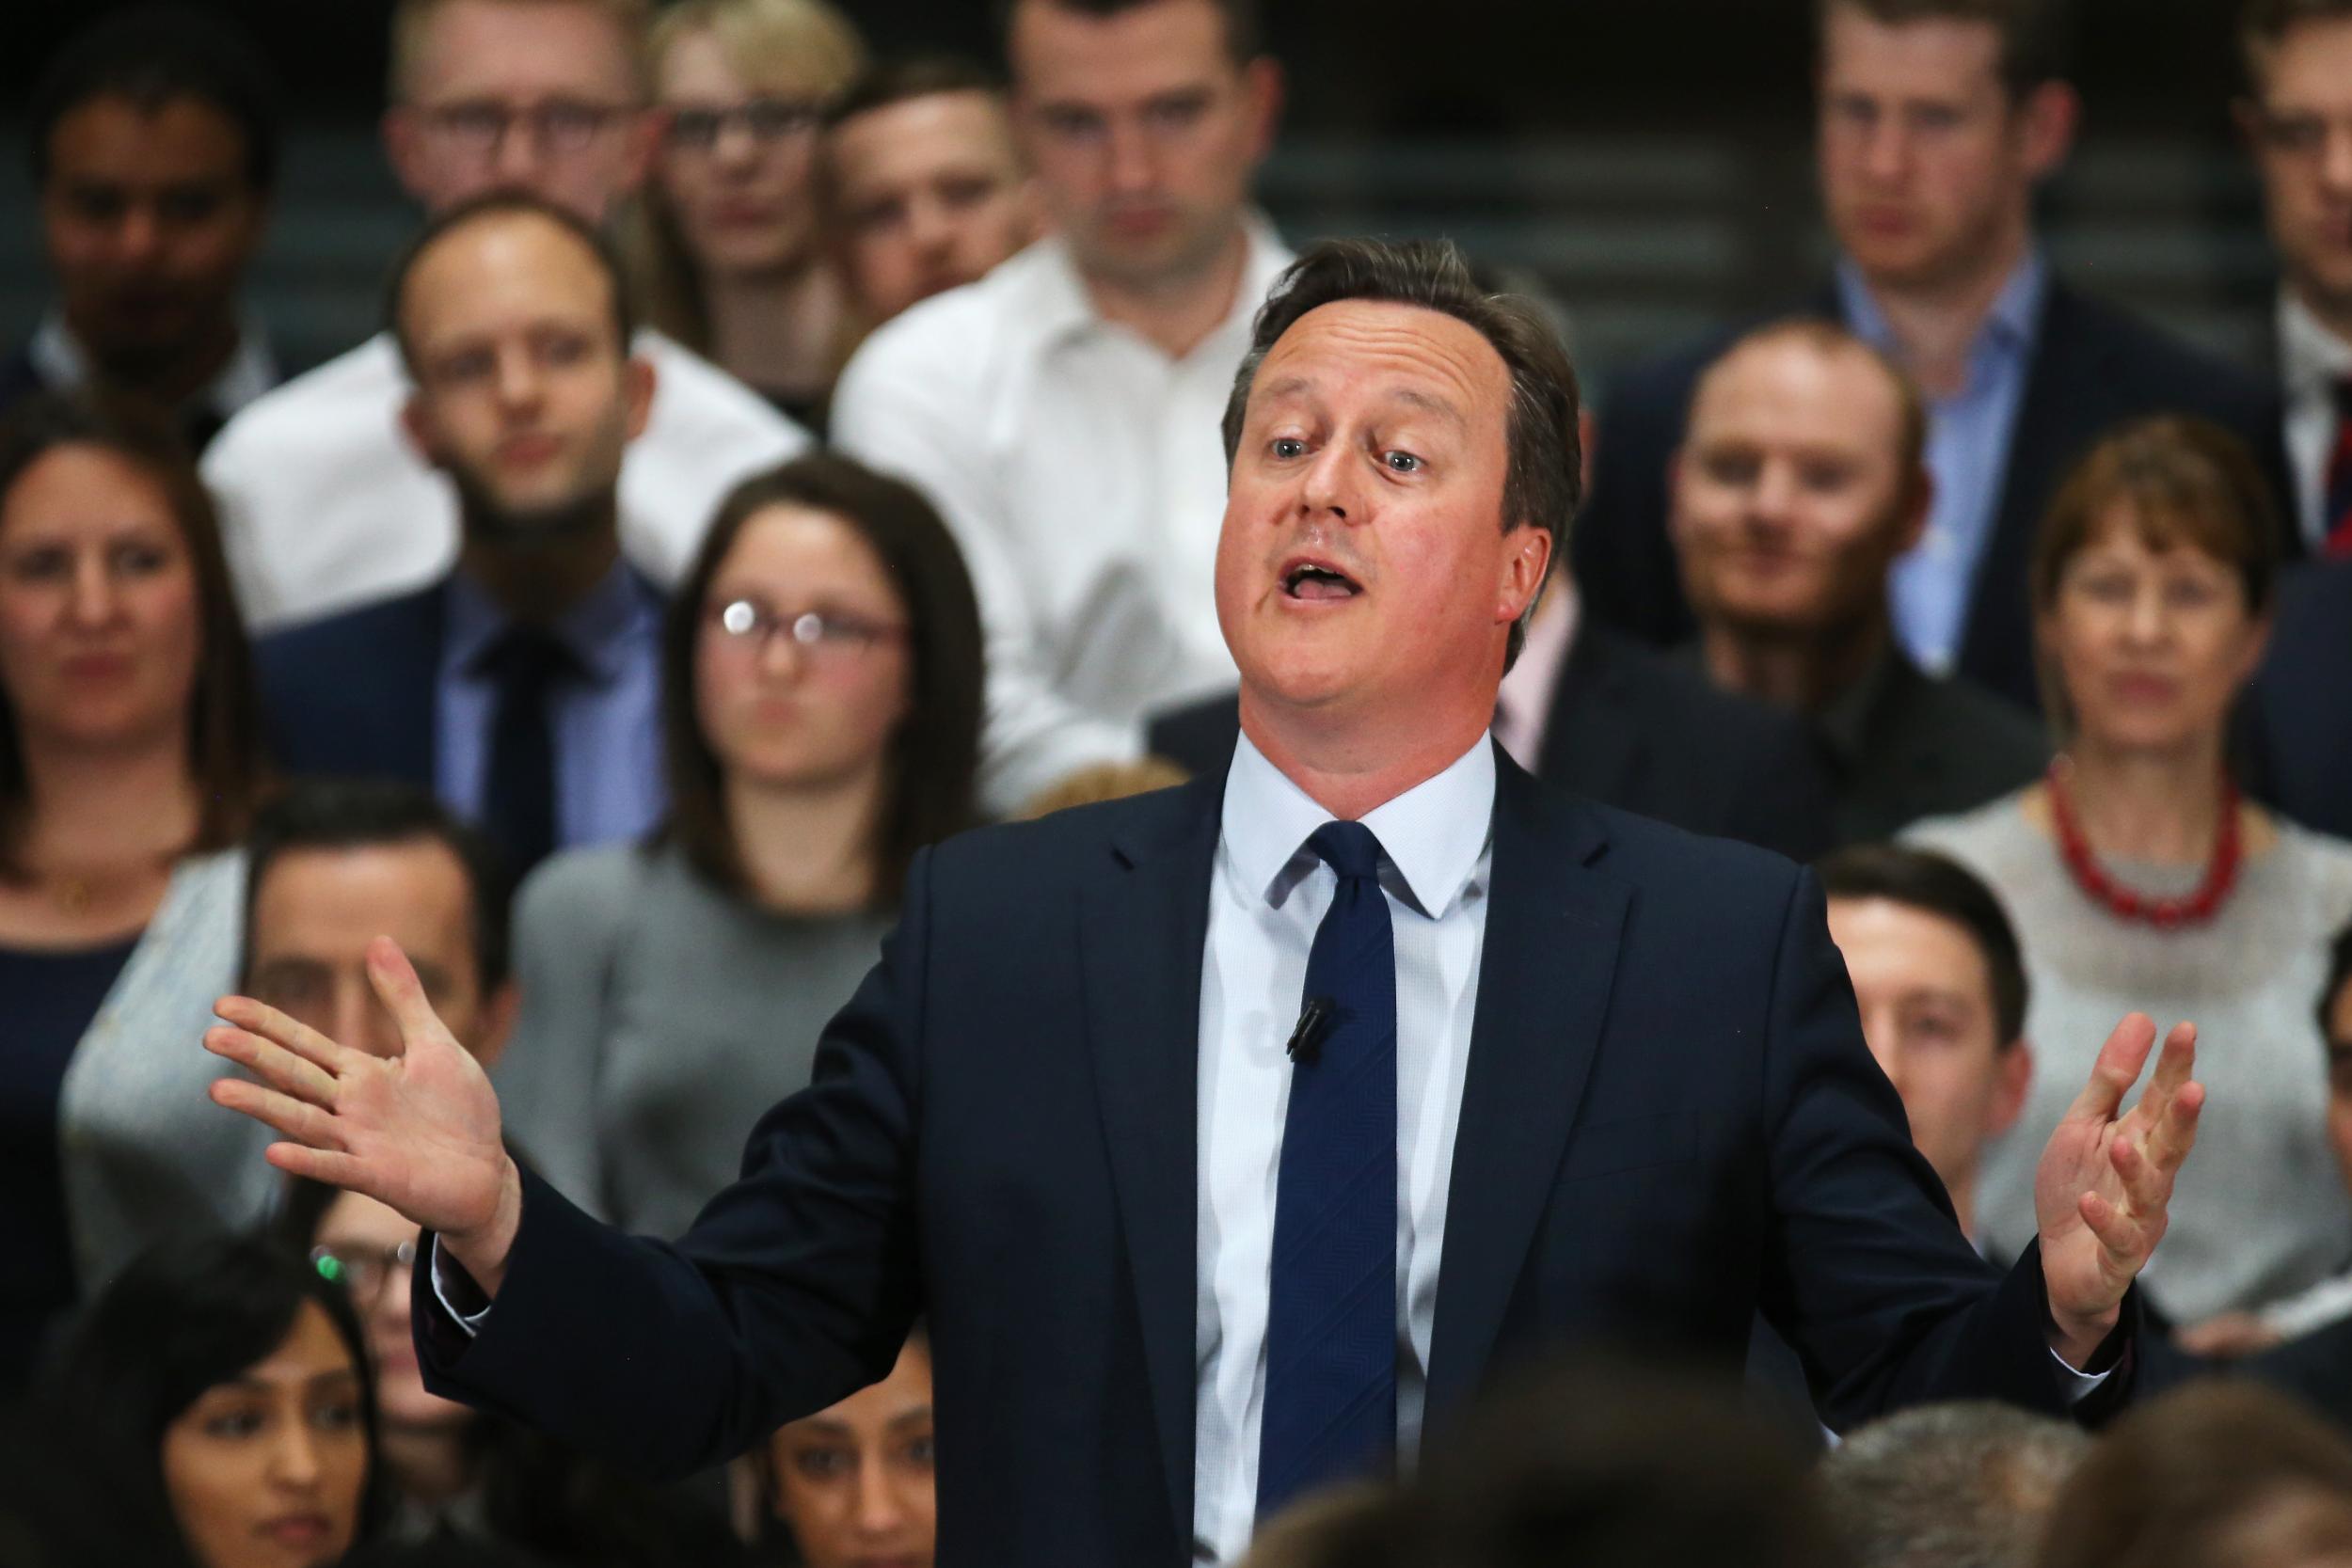 Are the revelations that David Cameron had an offshore trust fund surprising?